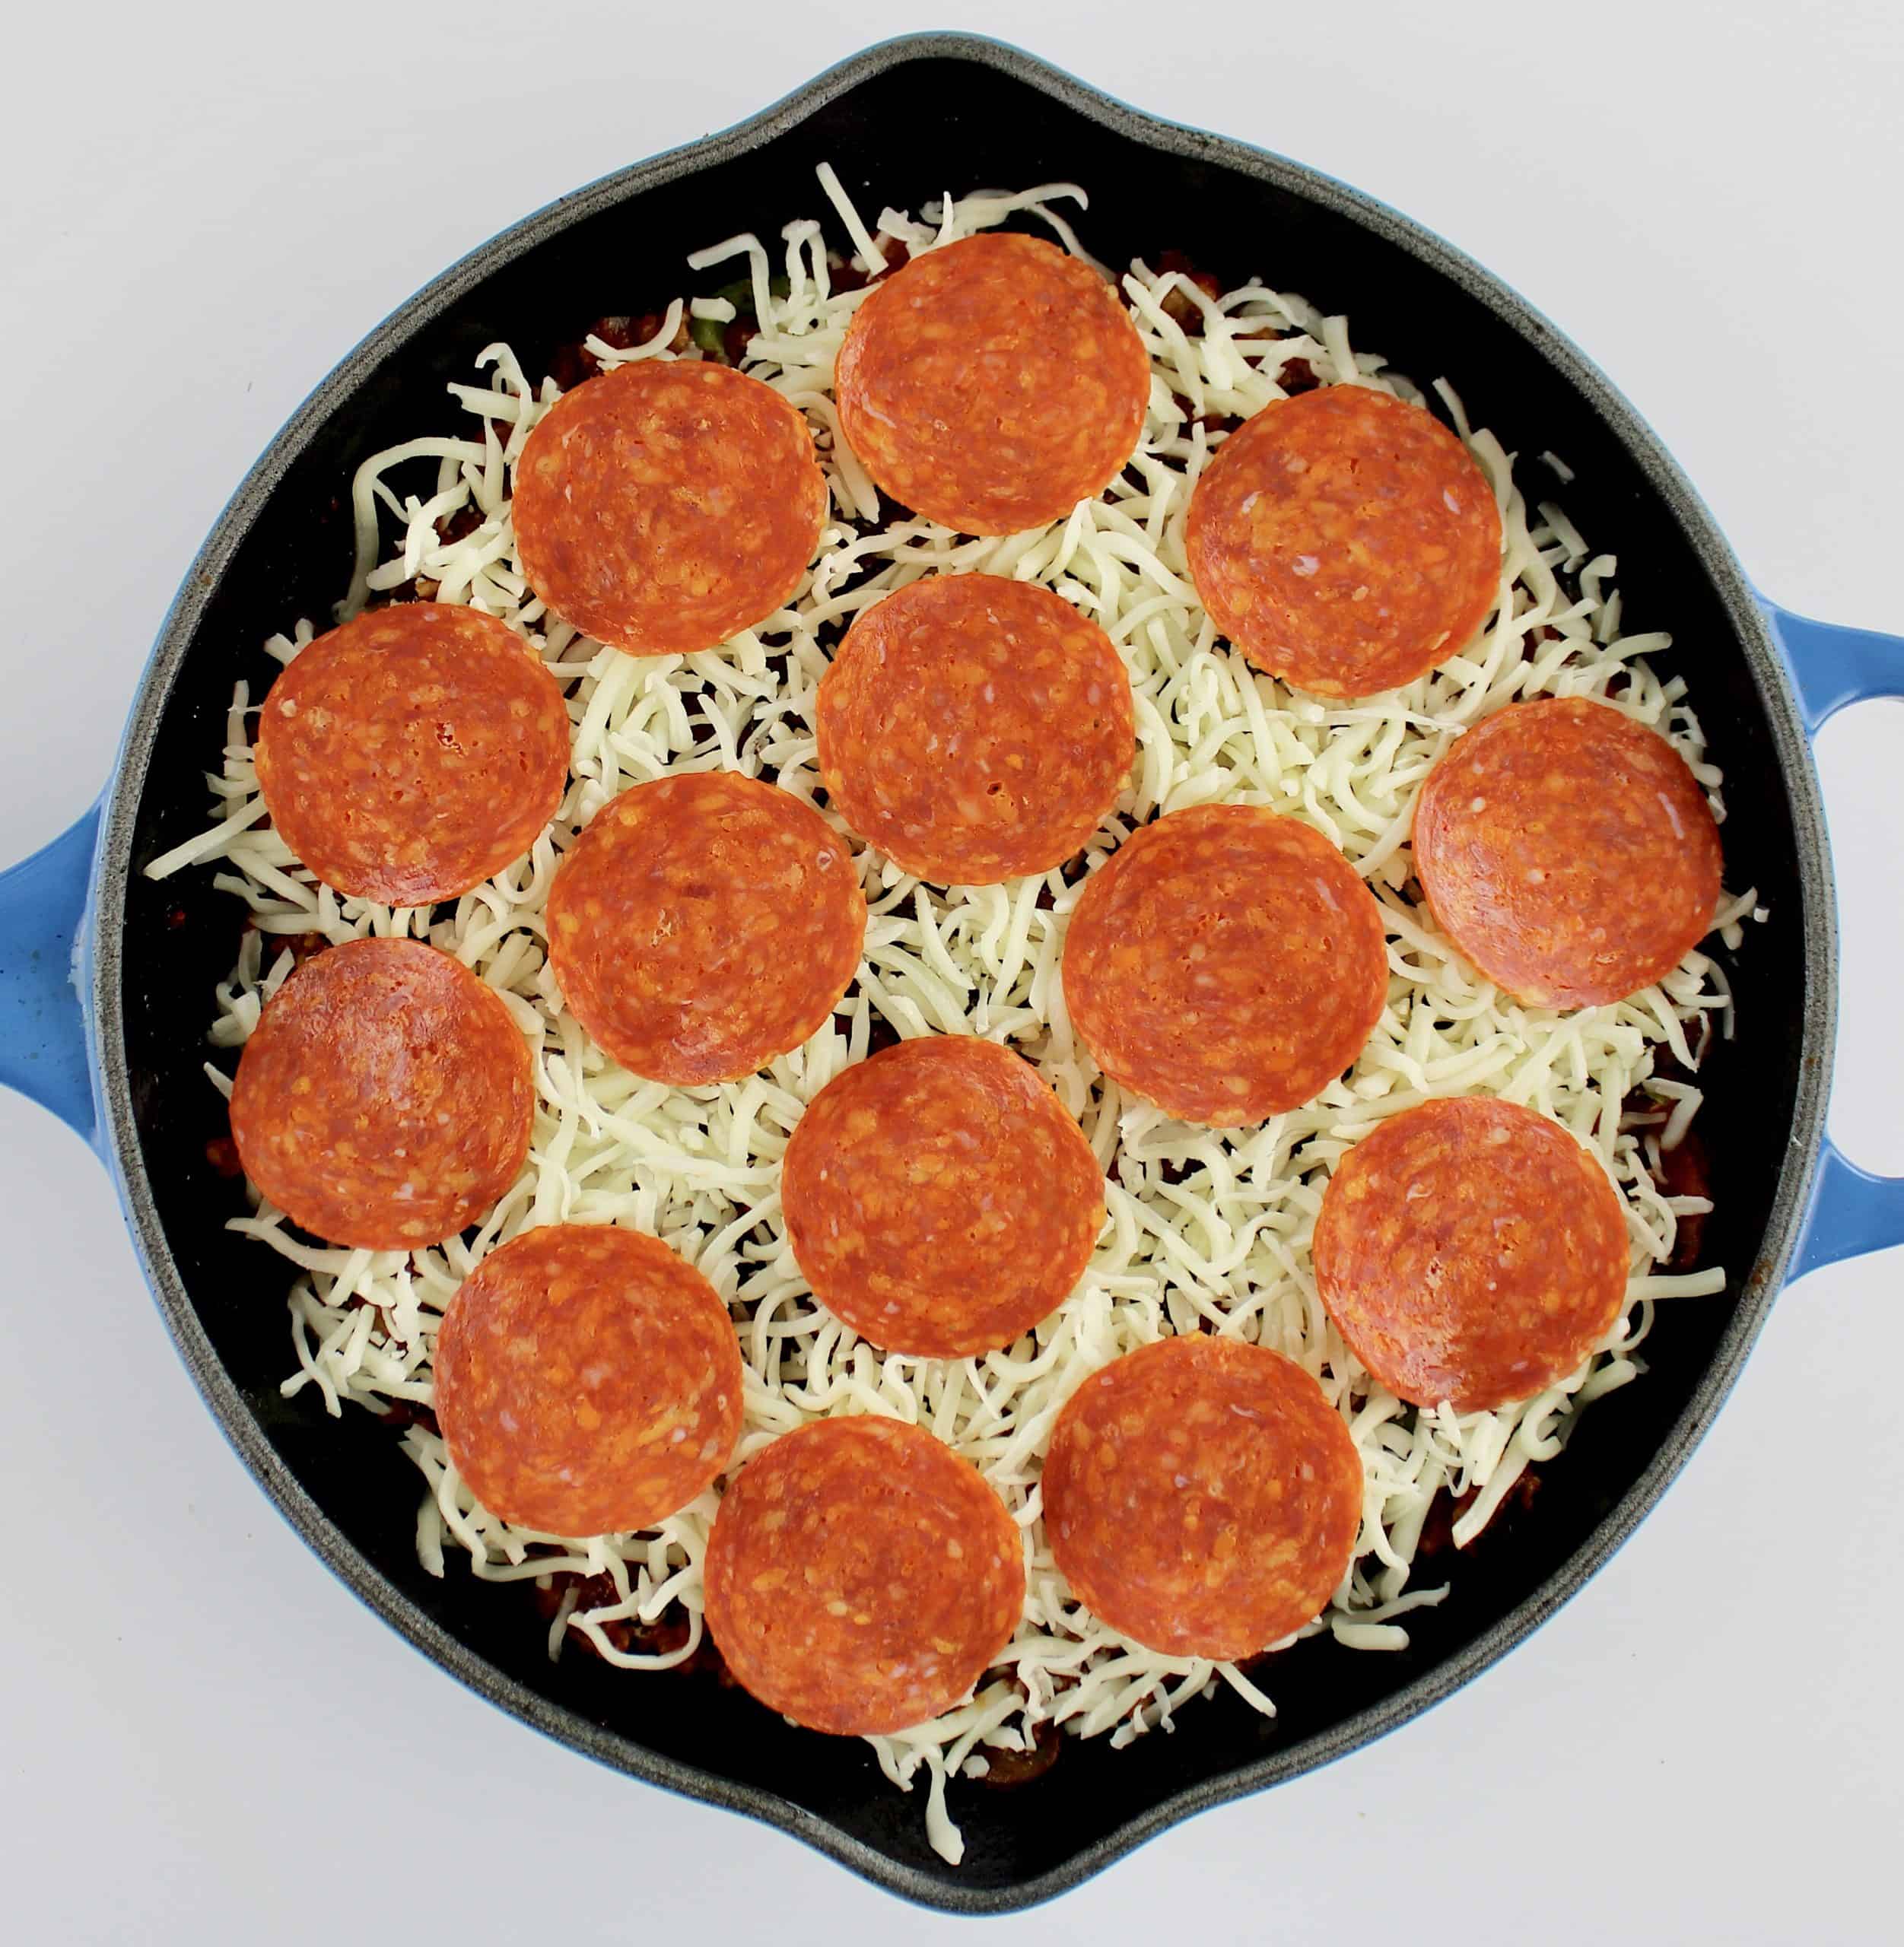 unbaked crustless pizza in skillet with shredded cheese and pepperoni